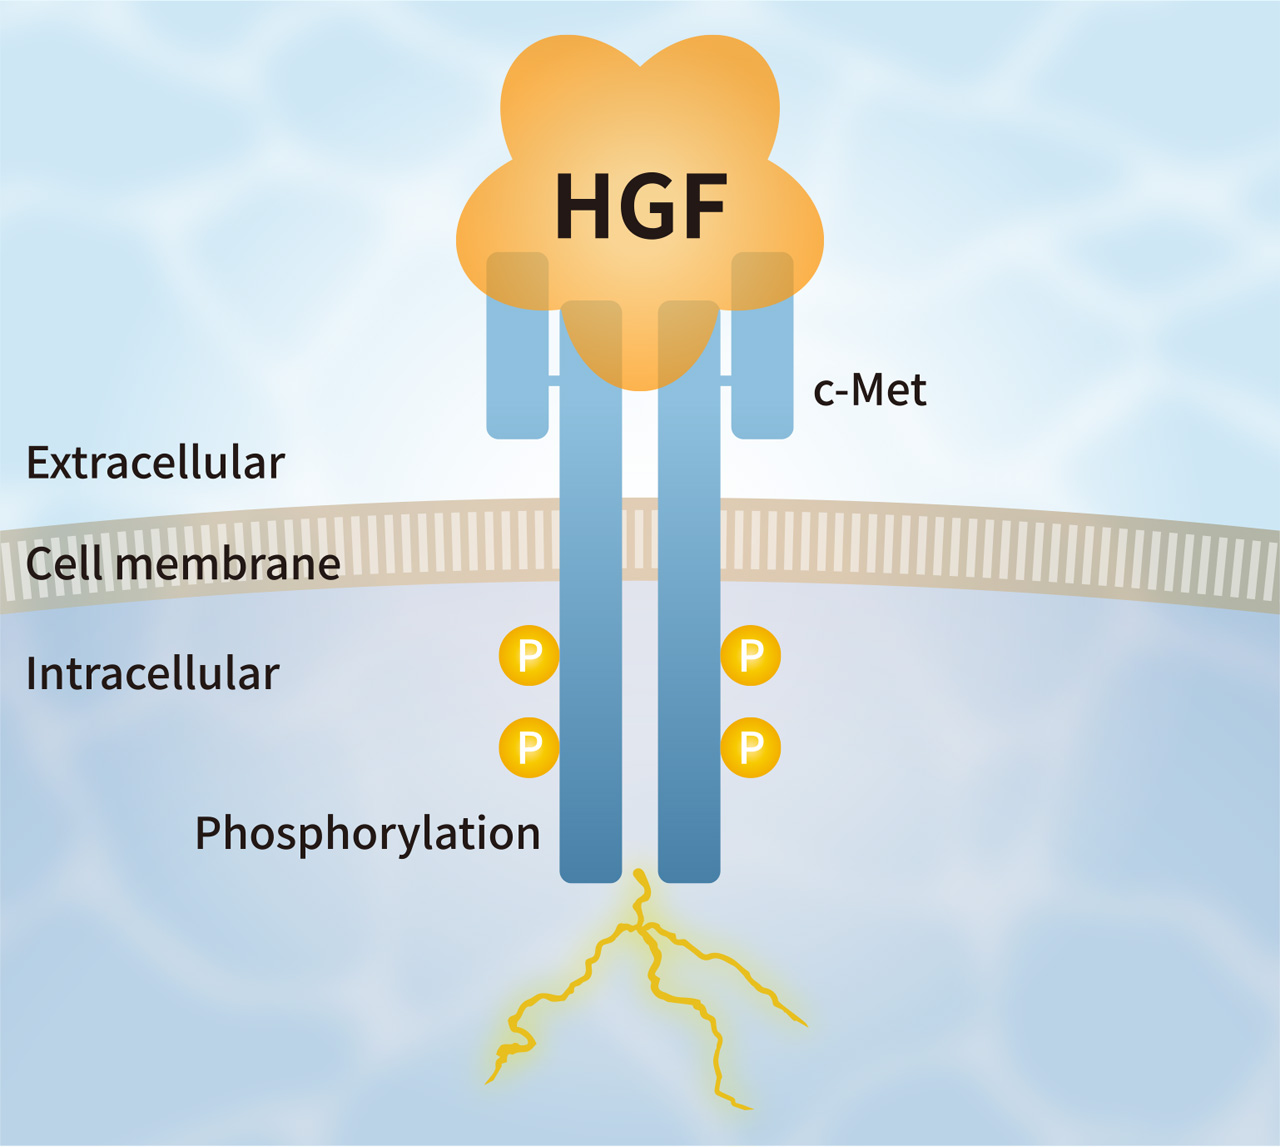 Induces Dimerization of c-Met and Exerts Biological Activity similar to HGF